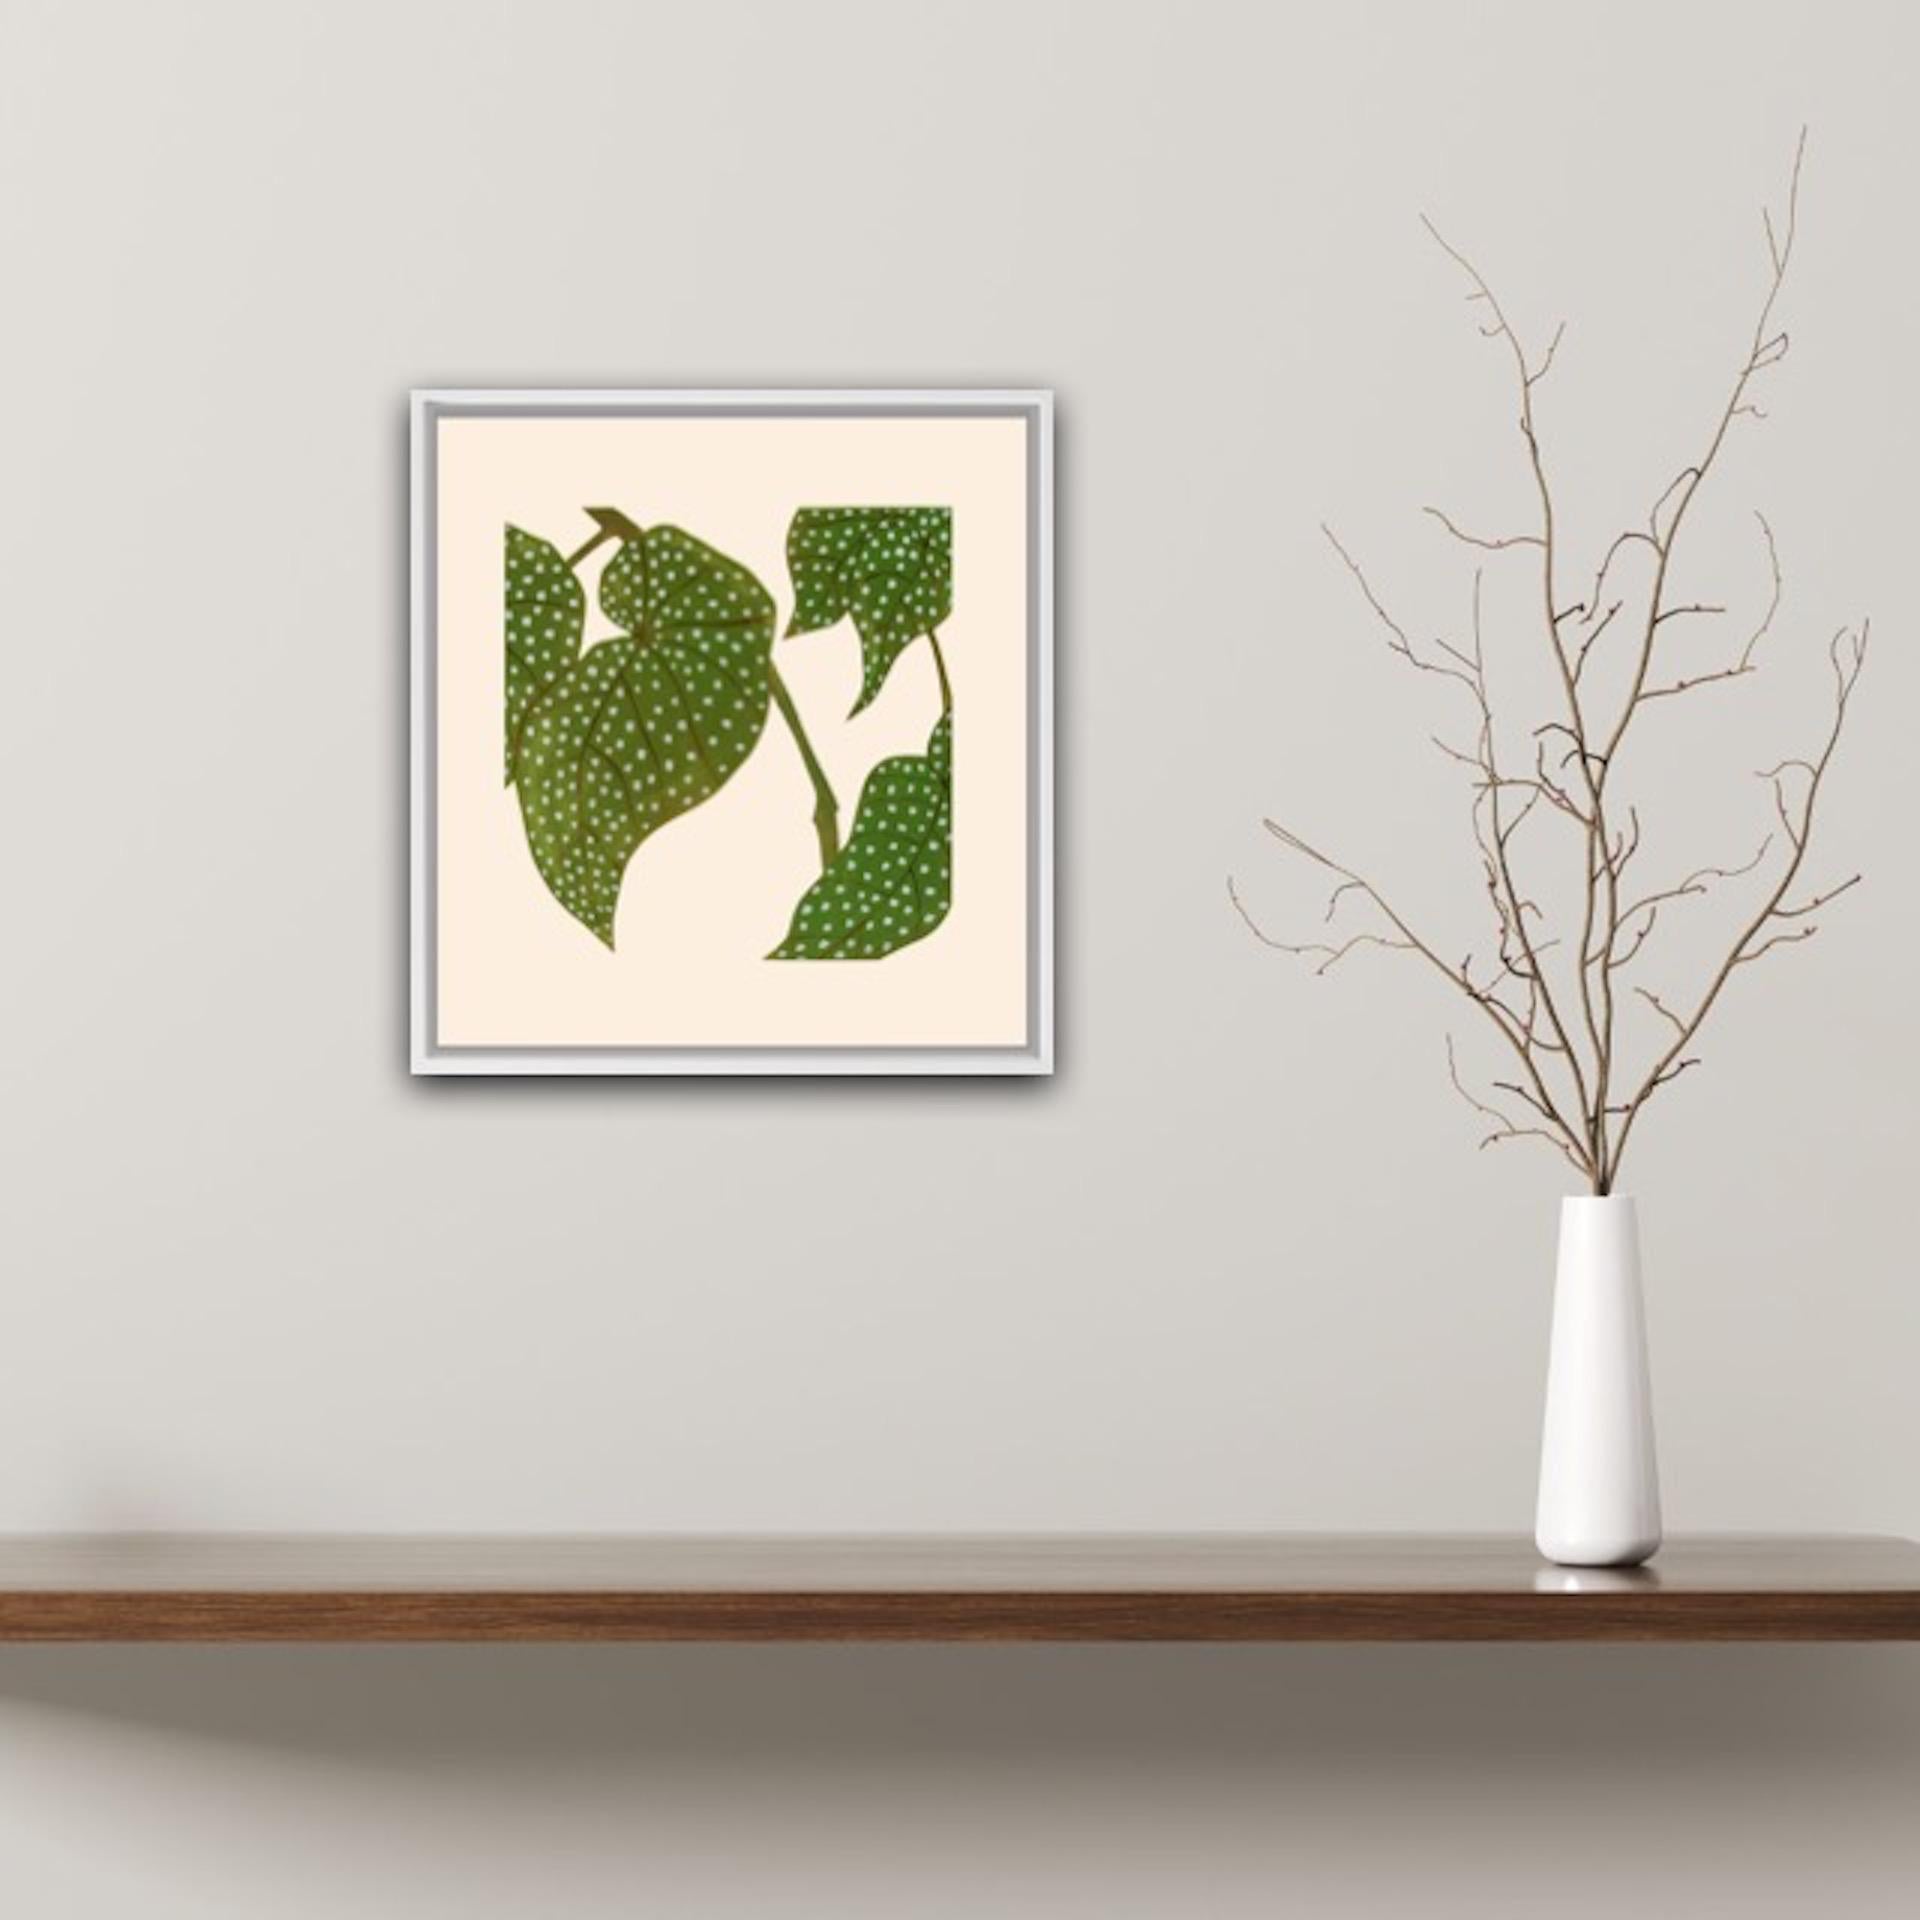 Kerry Day
Elephant Ears Begonia
Limited Edition Linocut Print
Edition of 10
Size: H 43cm x W 42cm x D 0.1cm
Sold Unframed
Please note that insitu images are purely an indication of how a piece may look.

Elephant Ears Begonia by Kerry Day is a 5